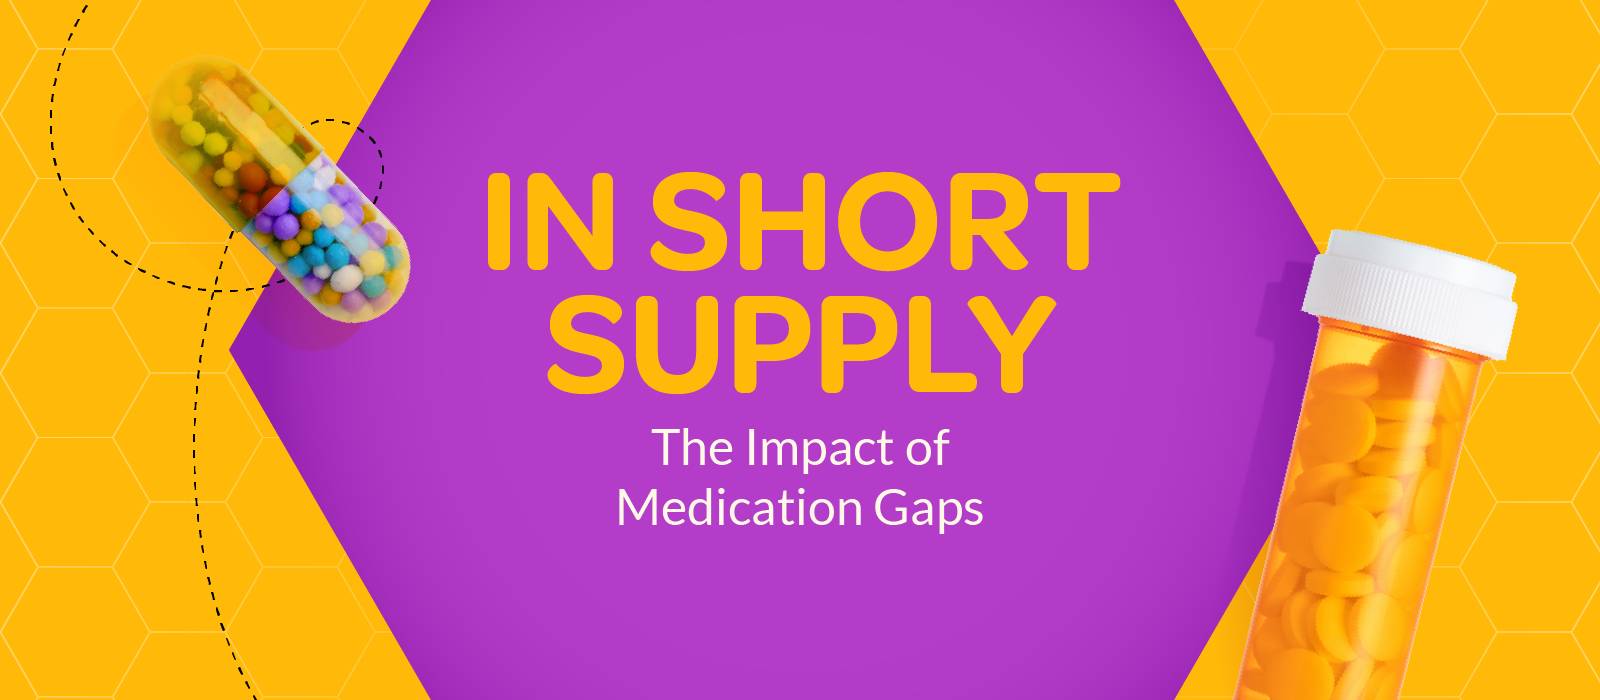 in short supply: the impact of medication gaps